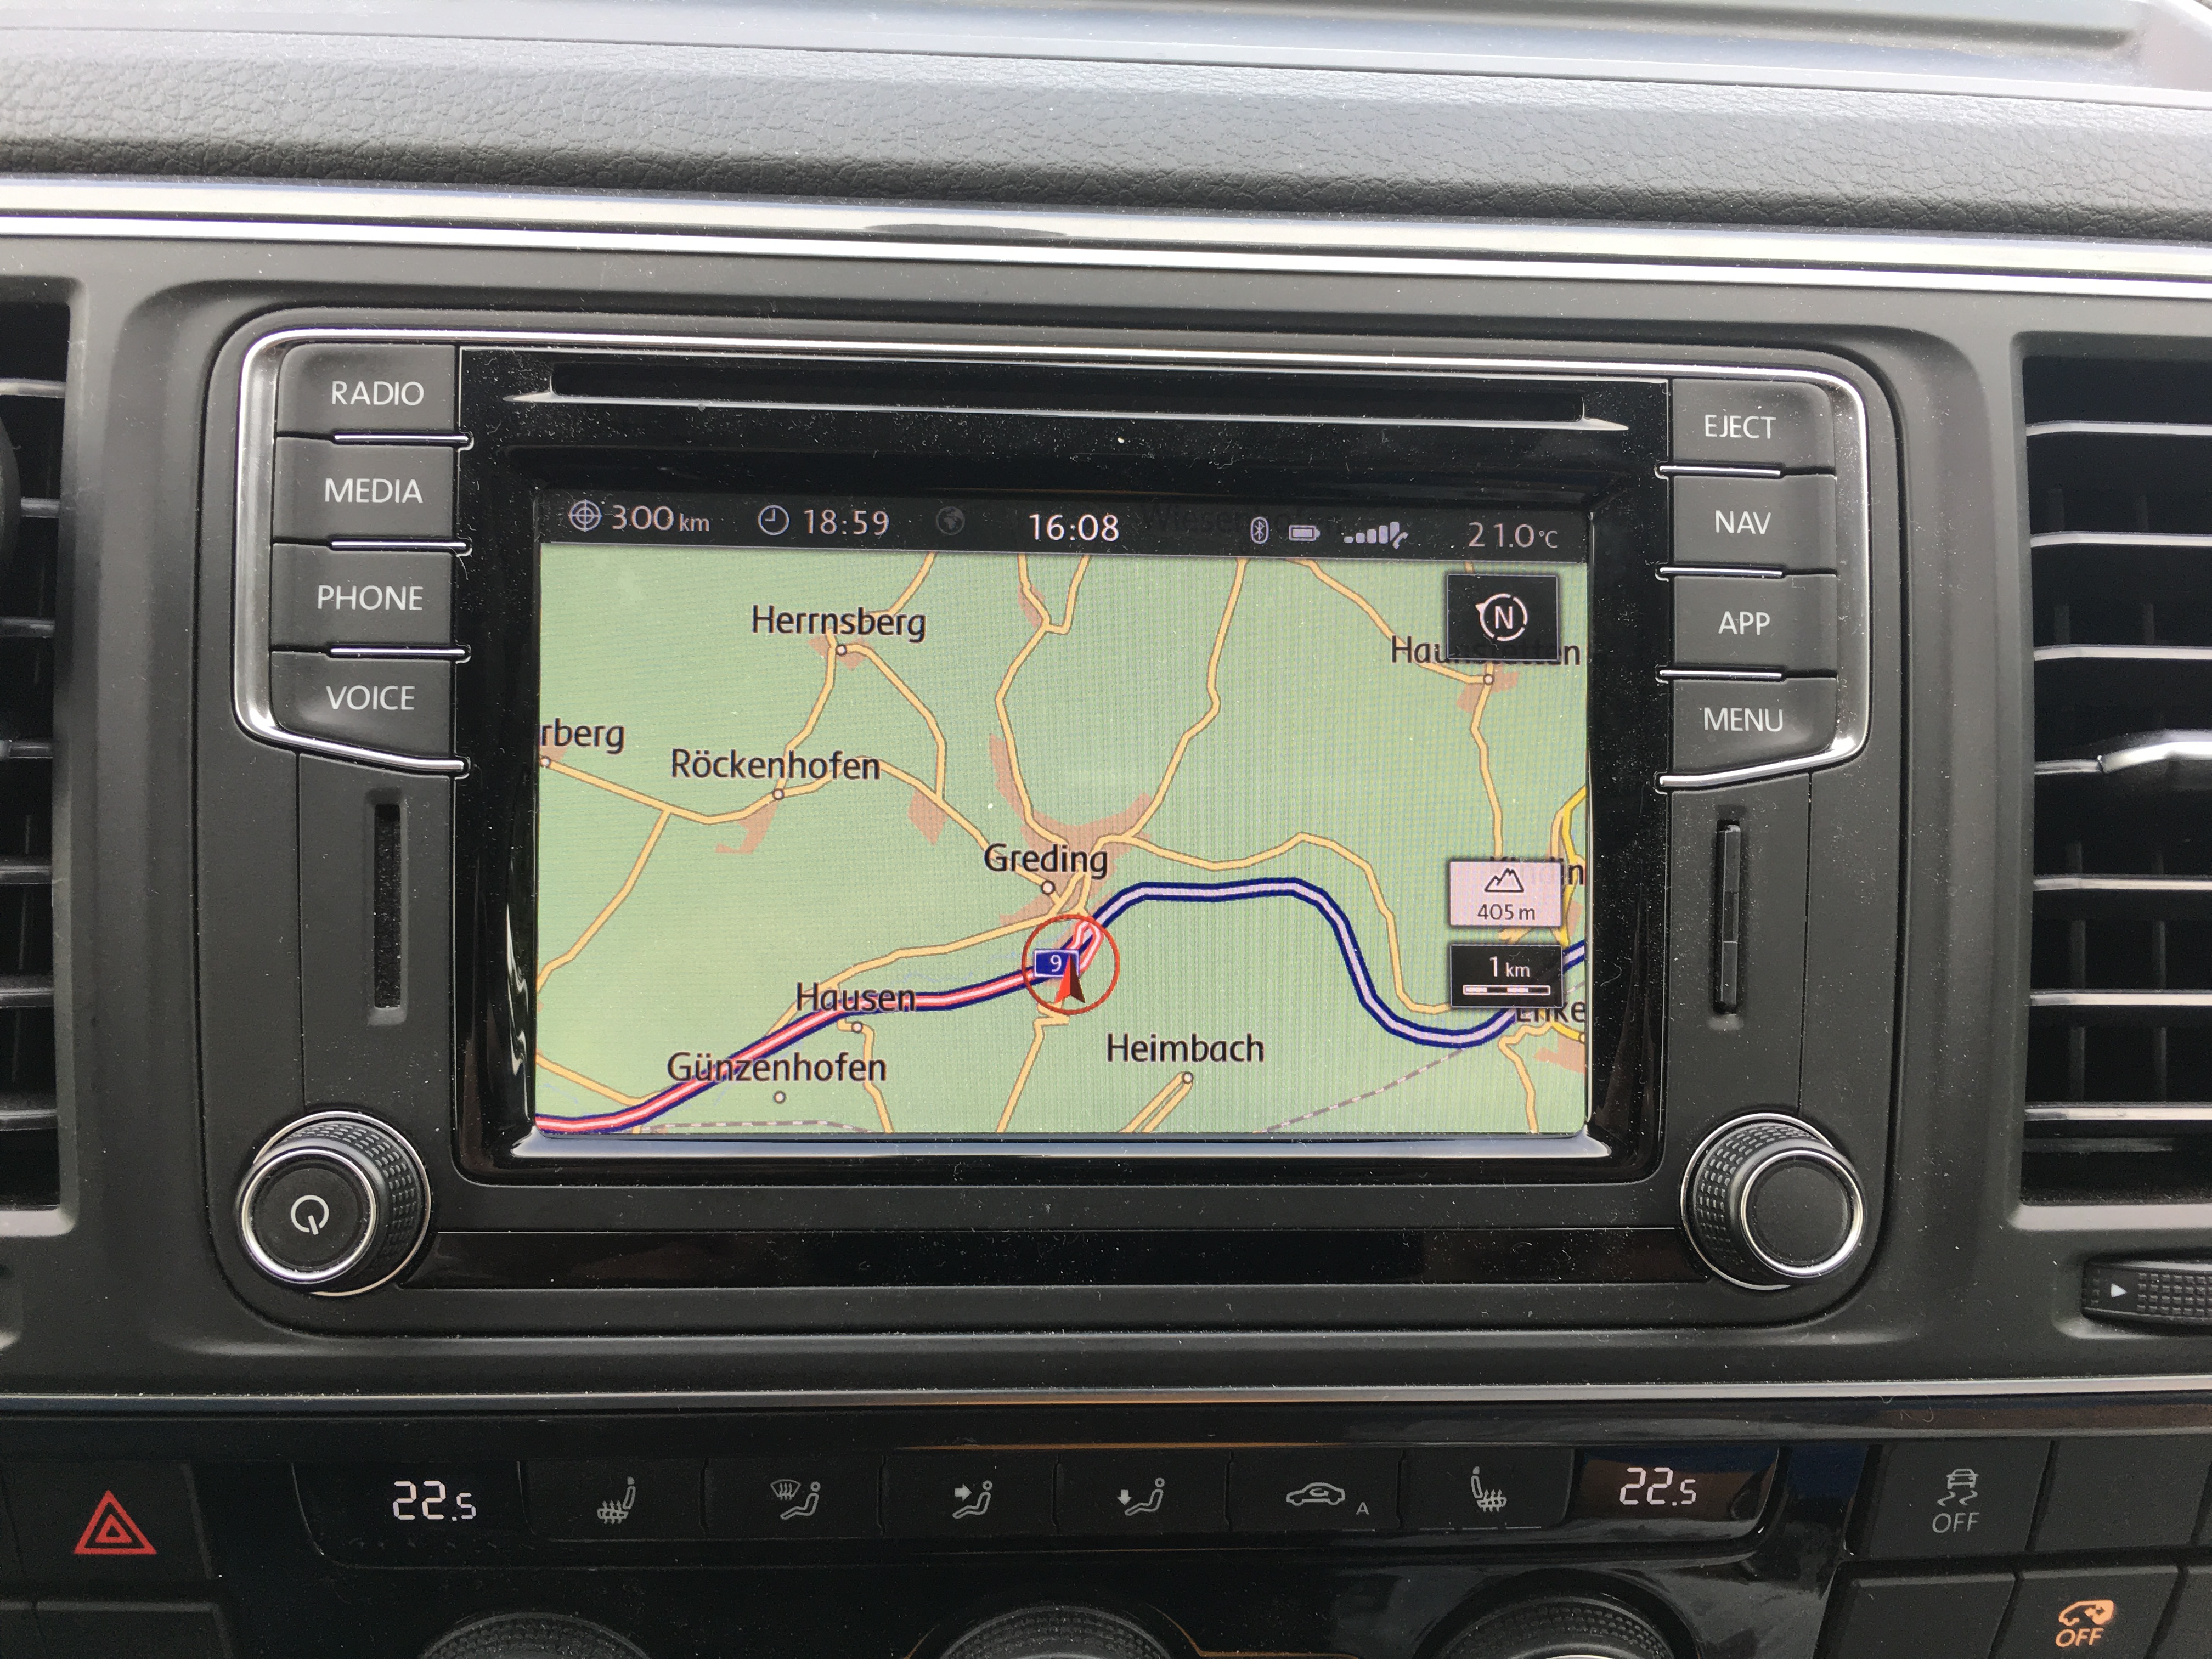 Volkswagen's navigation system from 2 suppliers